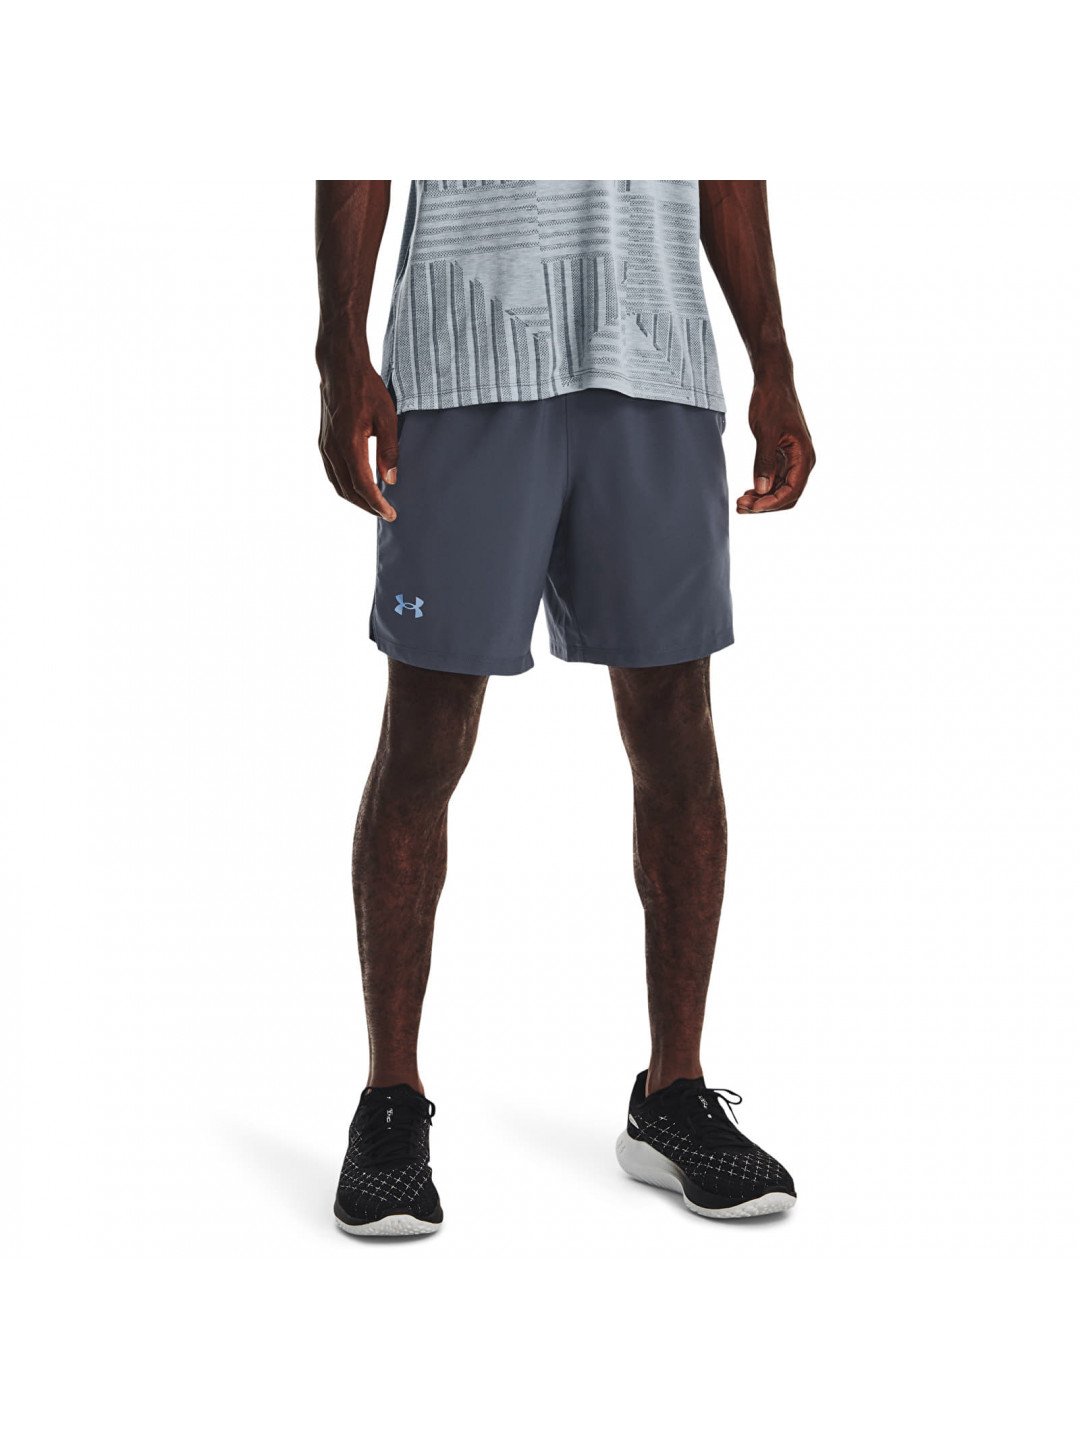 Under Armour Launch 7 2-In-1 Short Gray